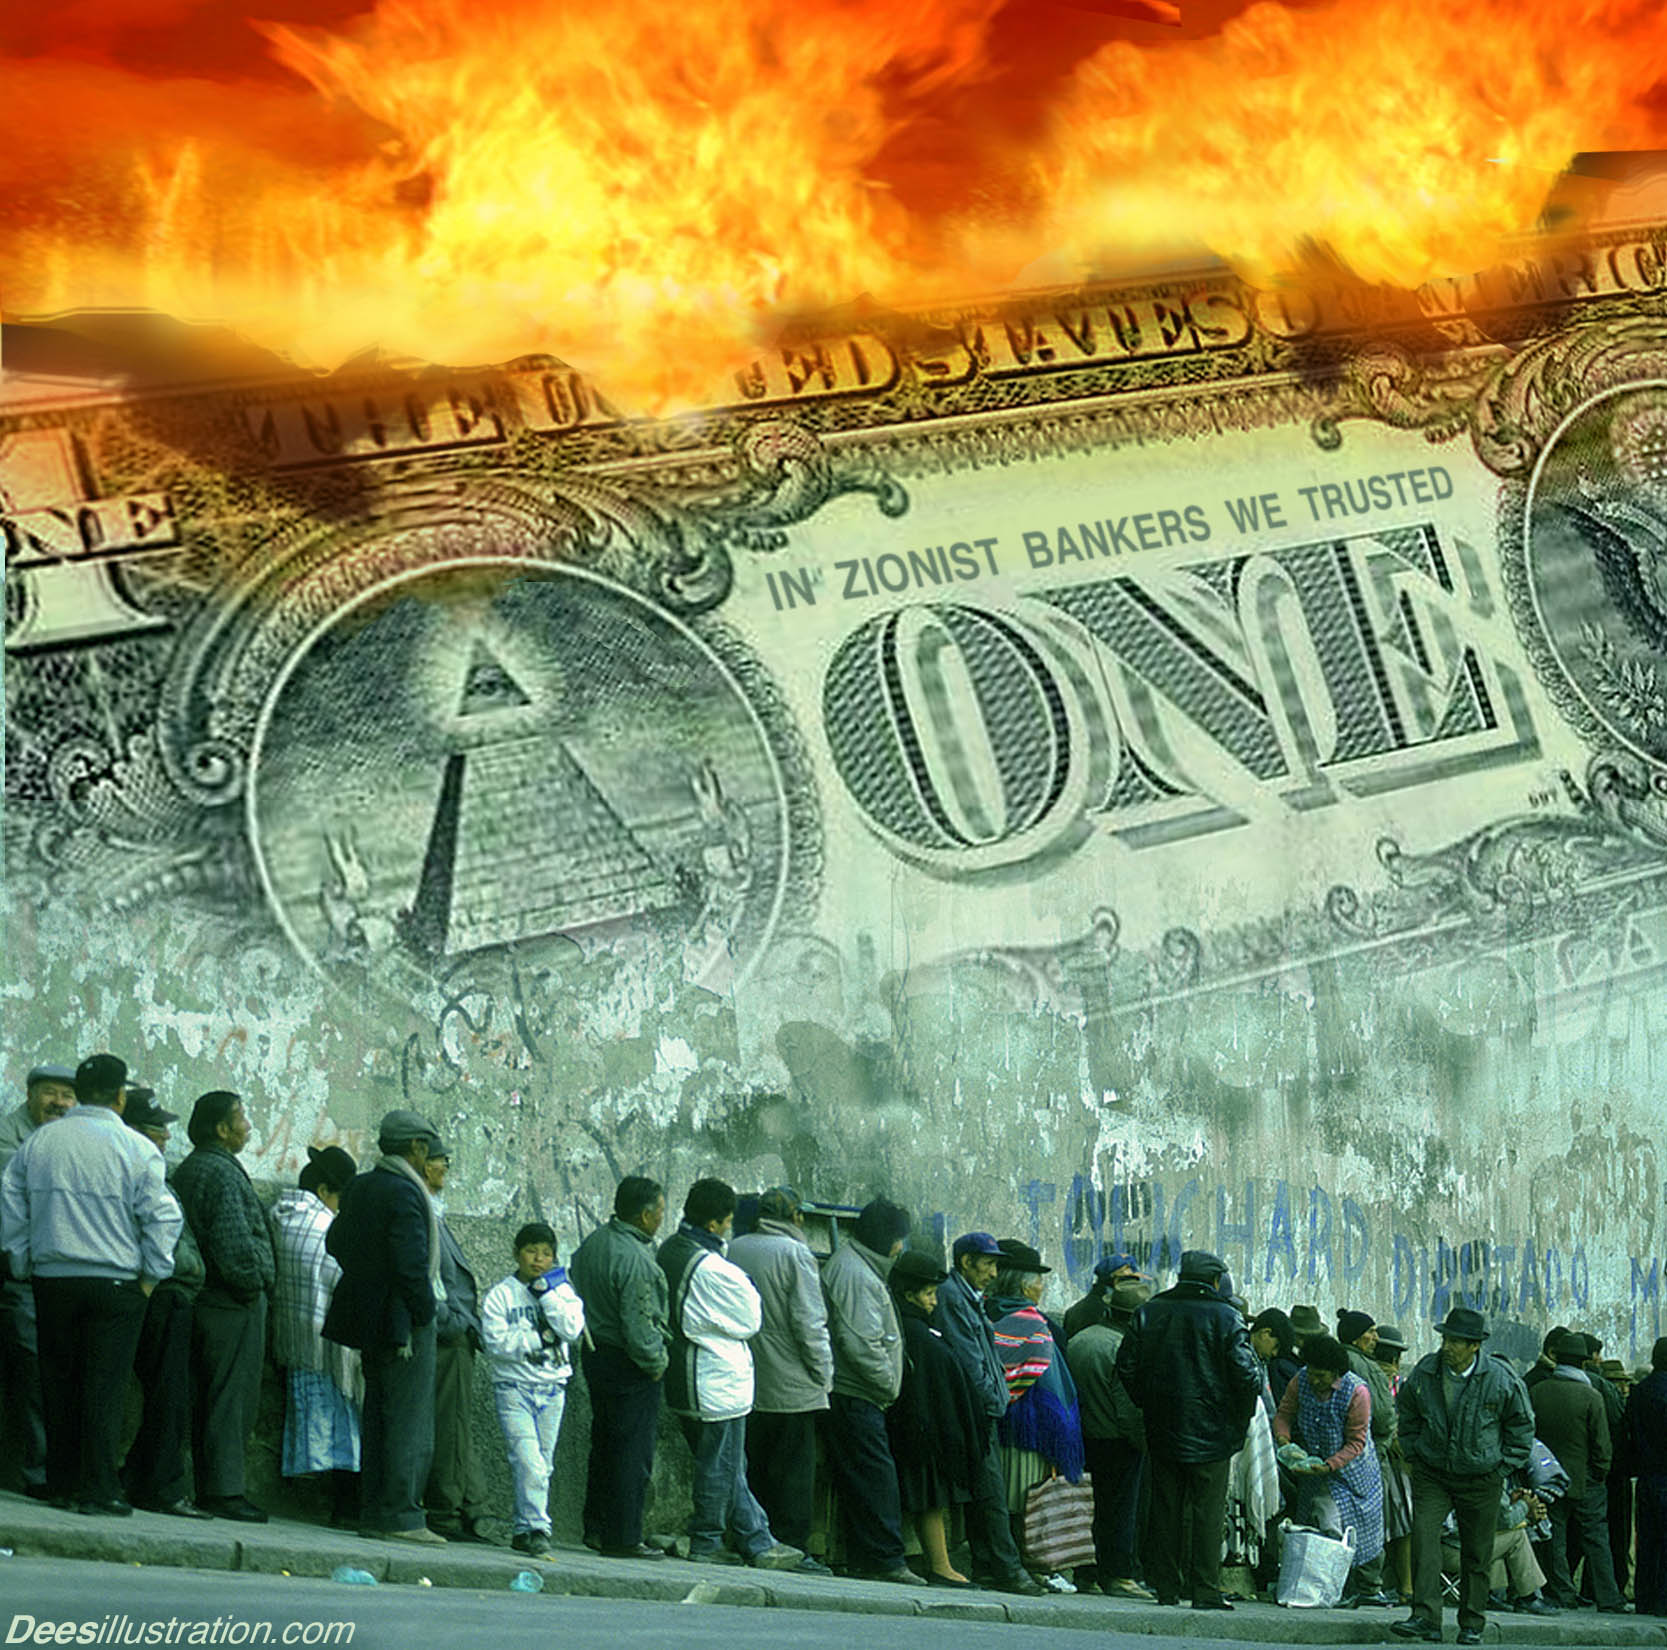 Situation Update, May 4th, 2021 – Beware the financial FALLOUT from the vaccine bioweapons death wave